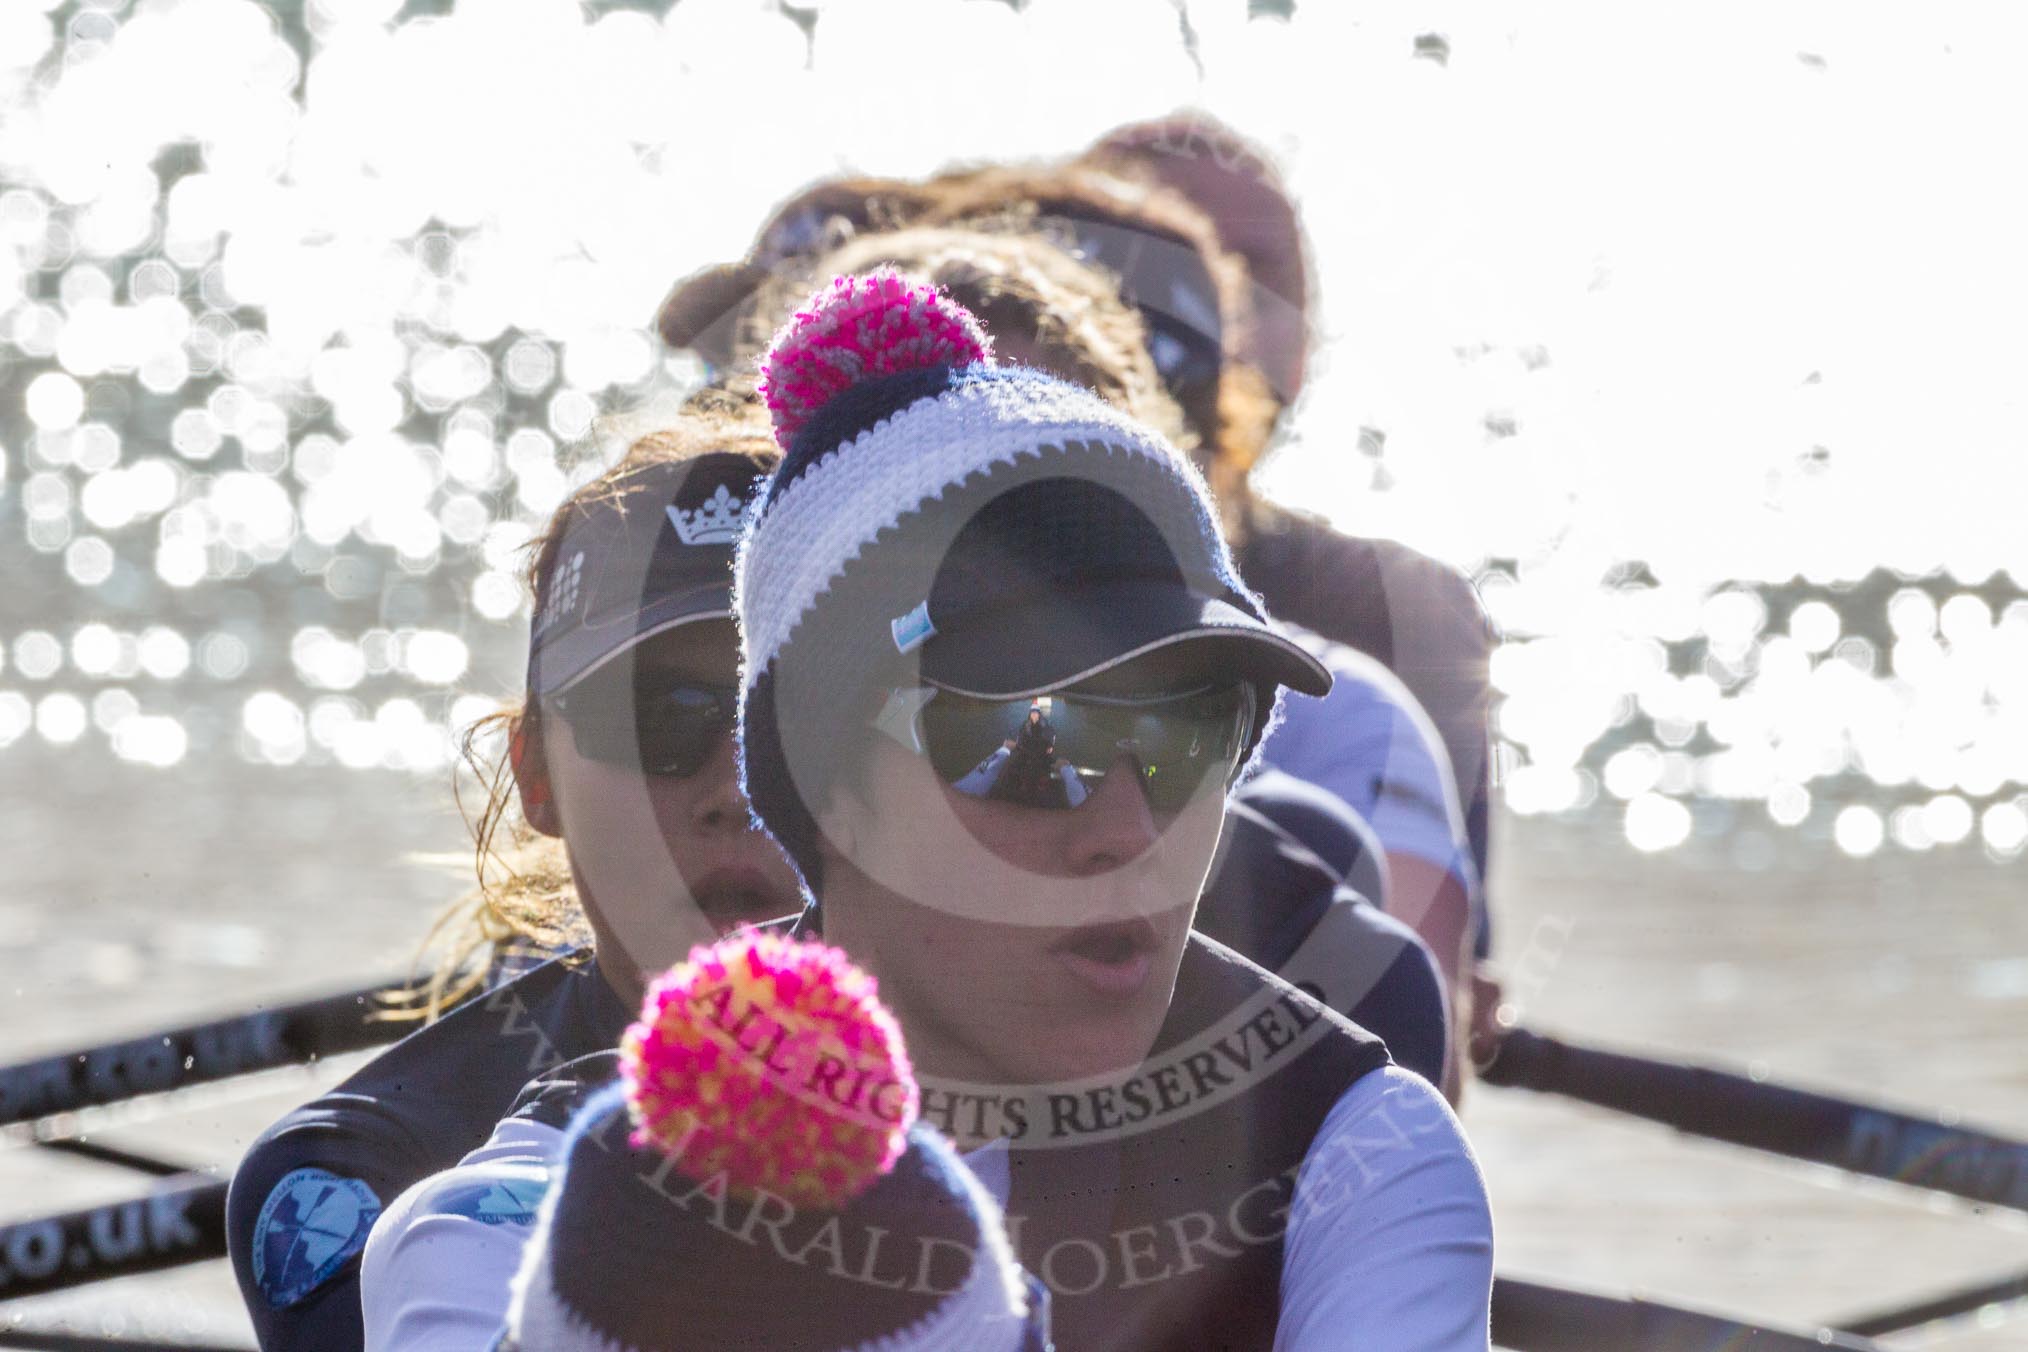 The Boat Race season 2015: OUWBC training Wallingford.

Wallingford,

United Kingdom,
on 04 March 2015 at 15:45, image #69